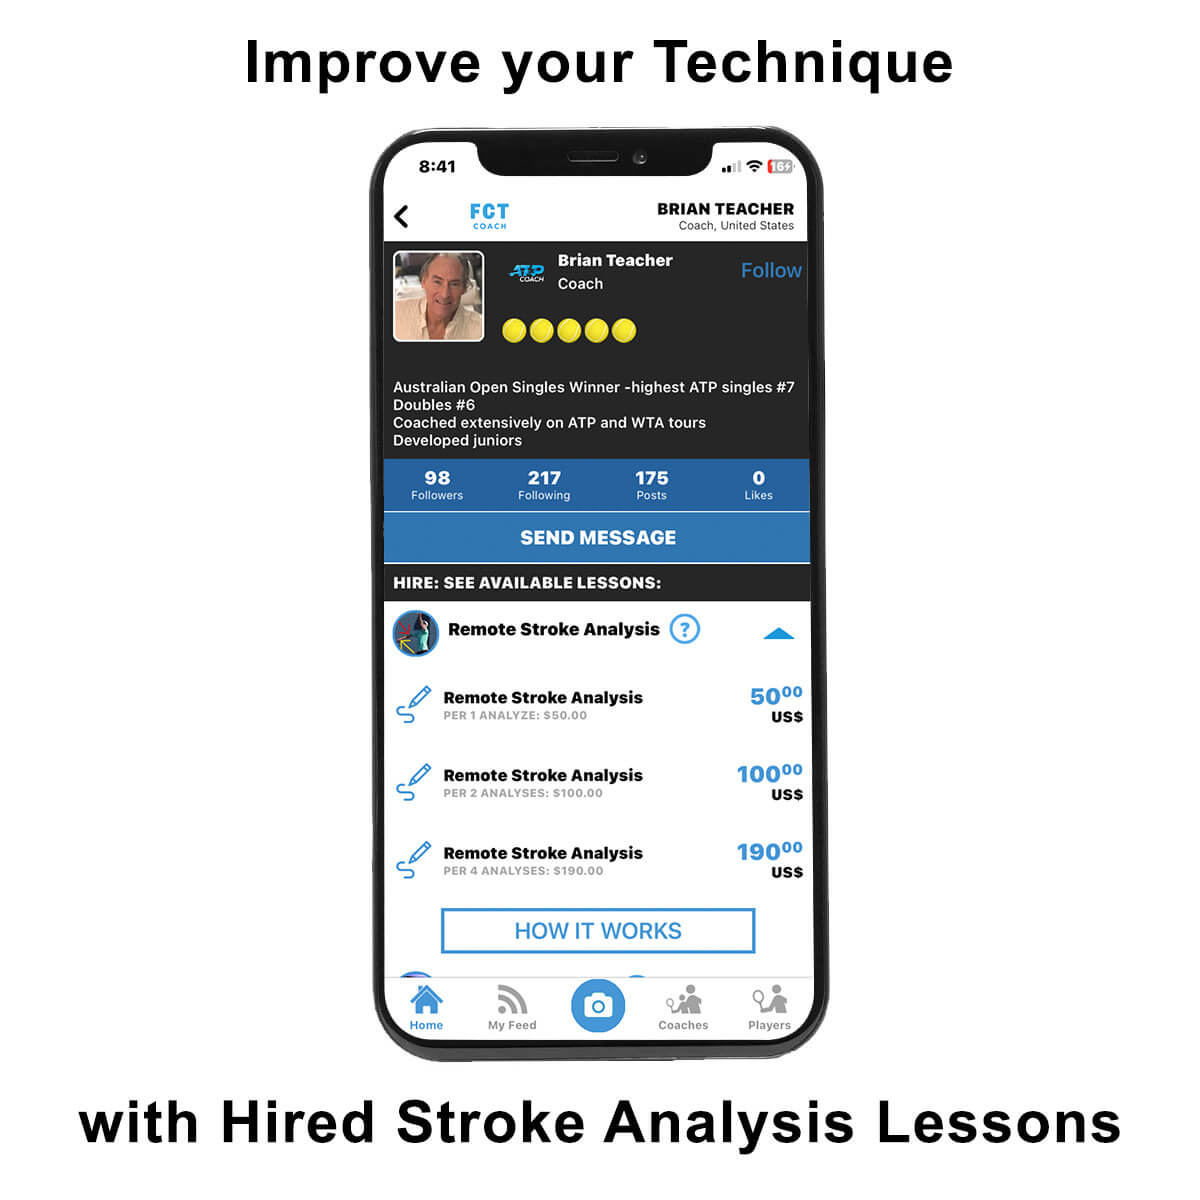 hired-stroke-analysis-lessons-for-players